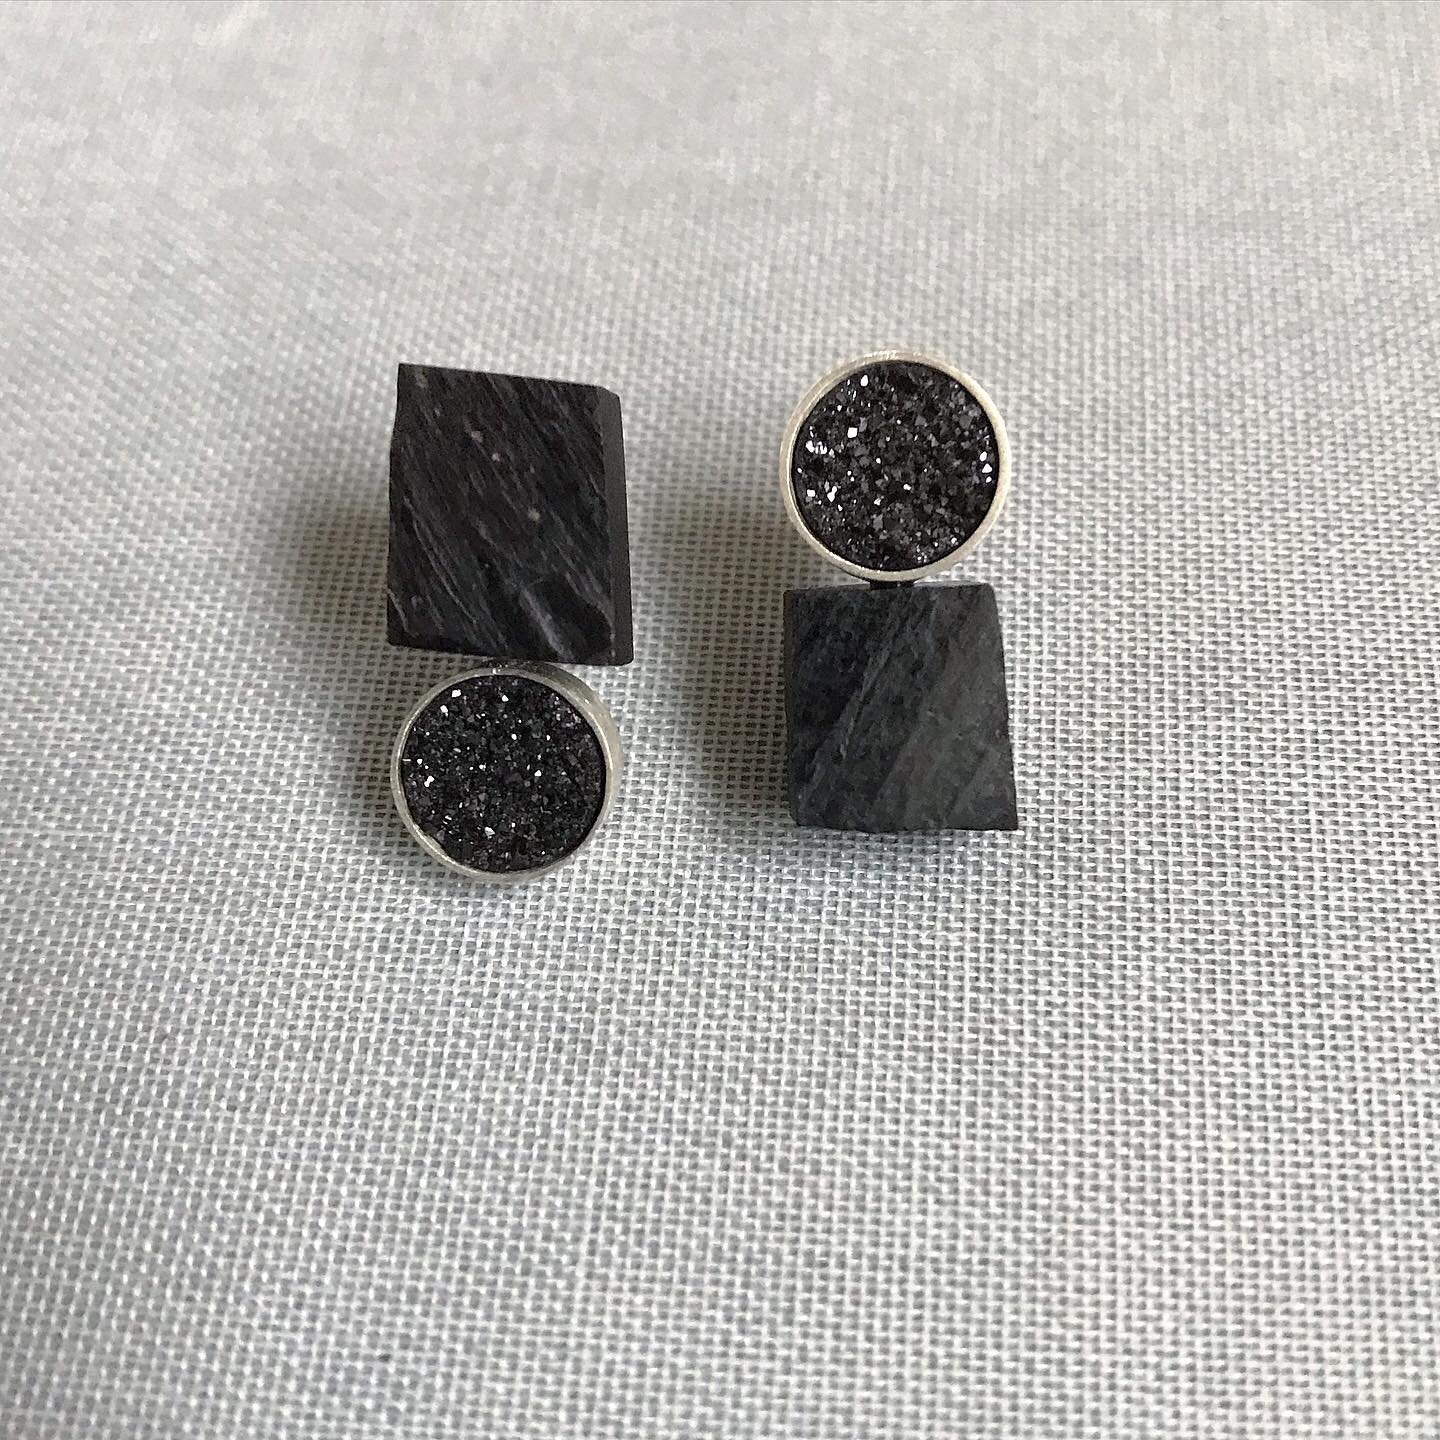 Opposite pairs #30dayearringchallenge
I&rsquo;ve managed to make 27 pairs of earrings during this time. All different! I will revealing more later. These will be going to @dazzleexhibitions @dovecotstudios
#whitbyjet #bauhaus #druzy #silver #earrings